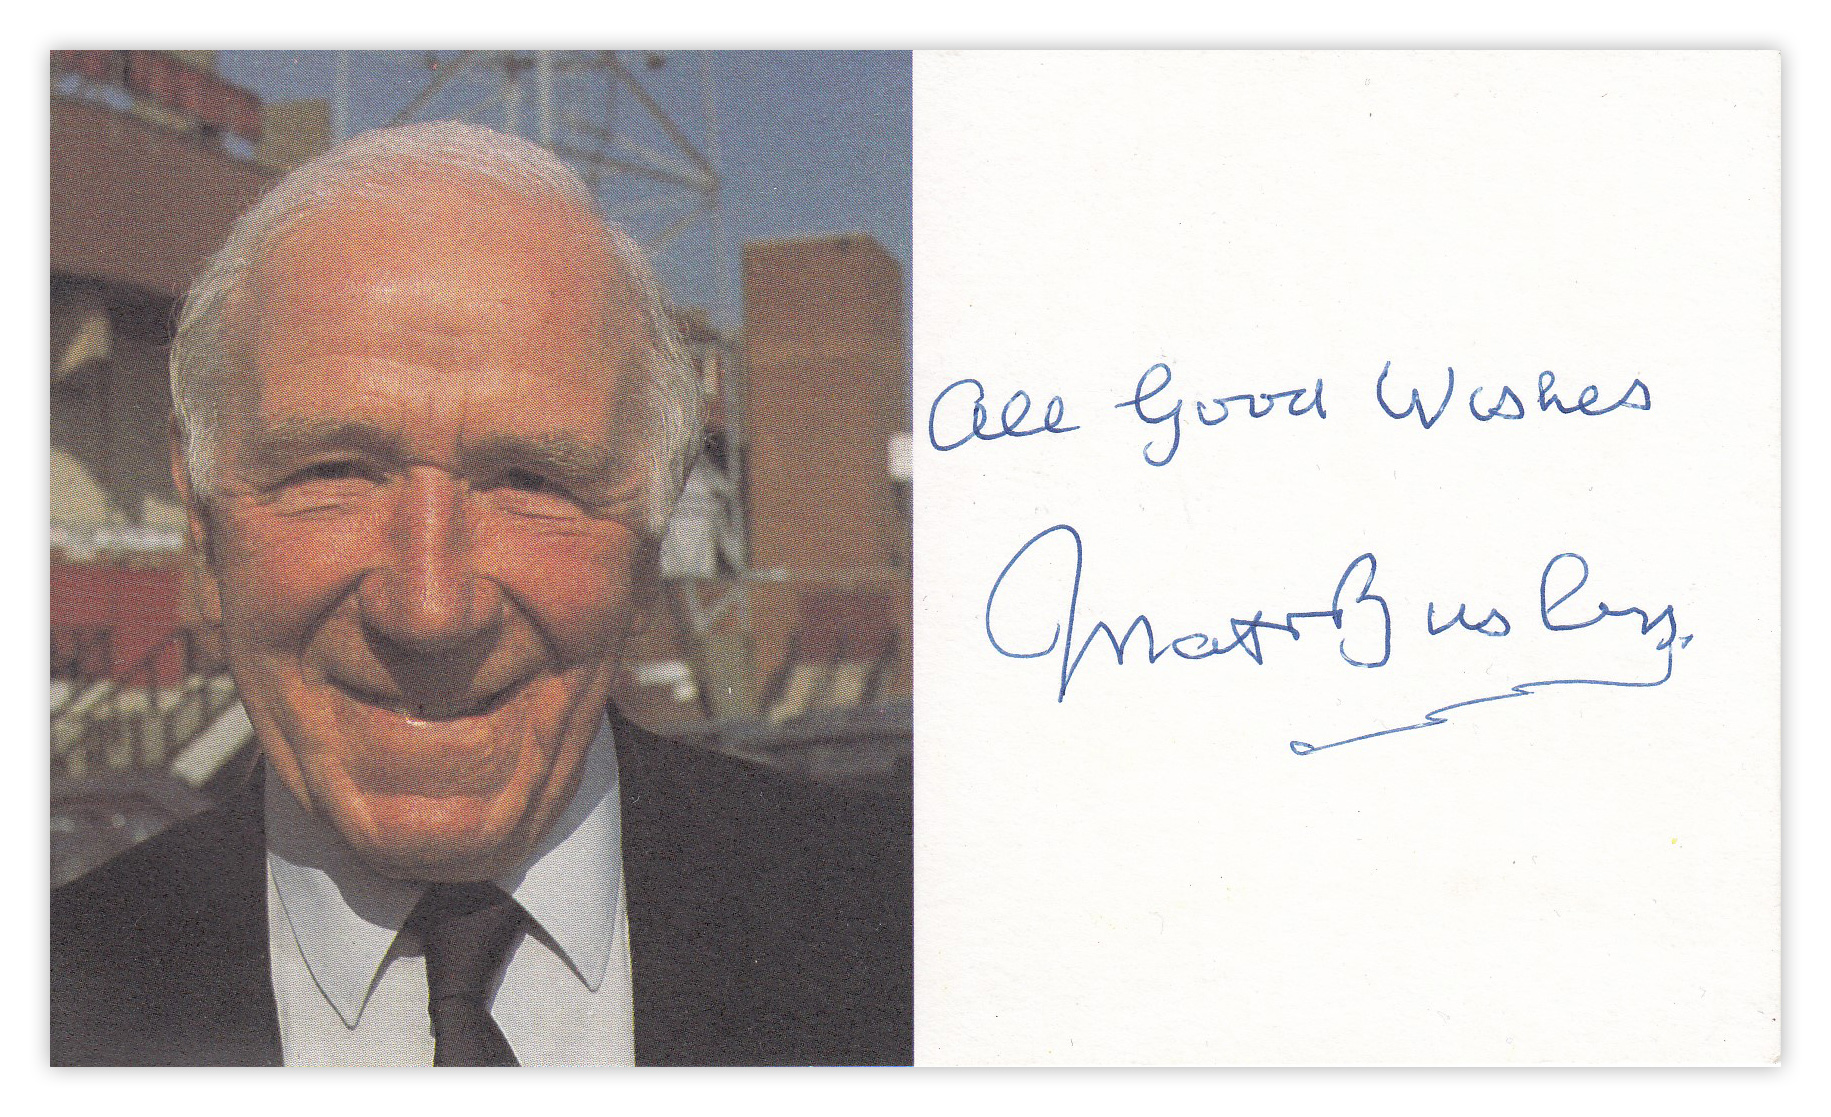 Autographed Sir Matt Busby Photocard, Official Manchester United Photocard Measuring 5.5 X 3.5